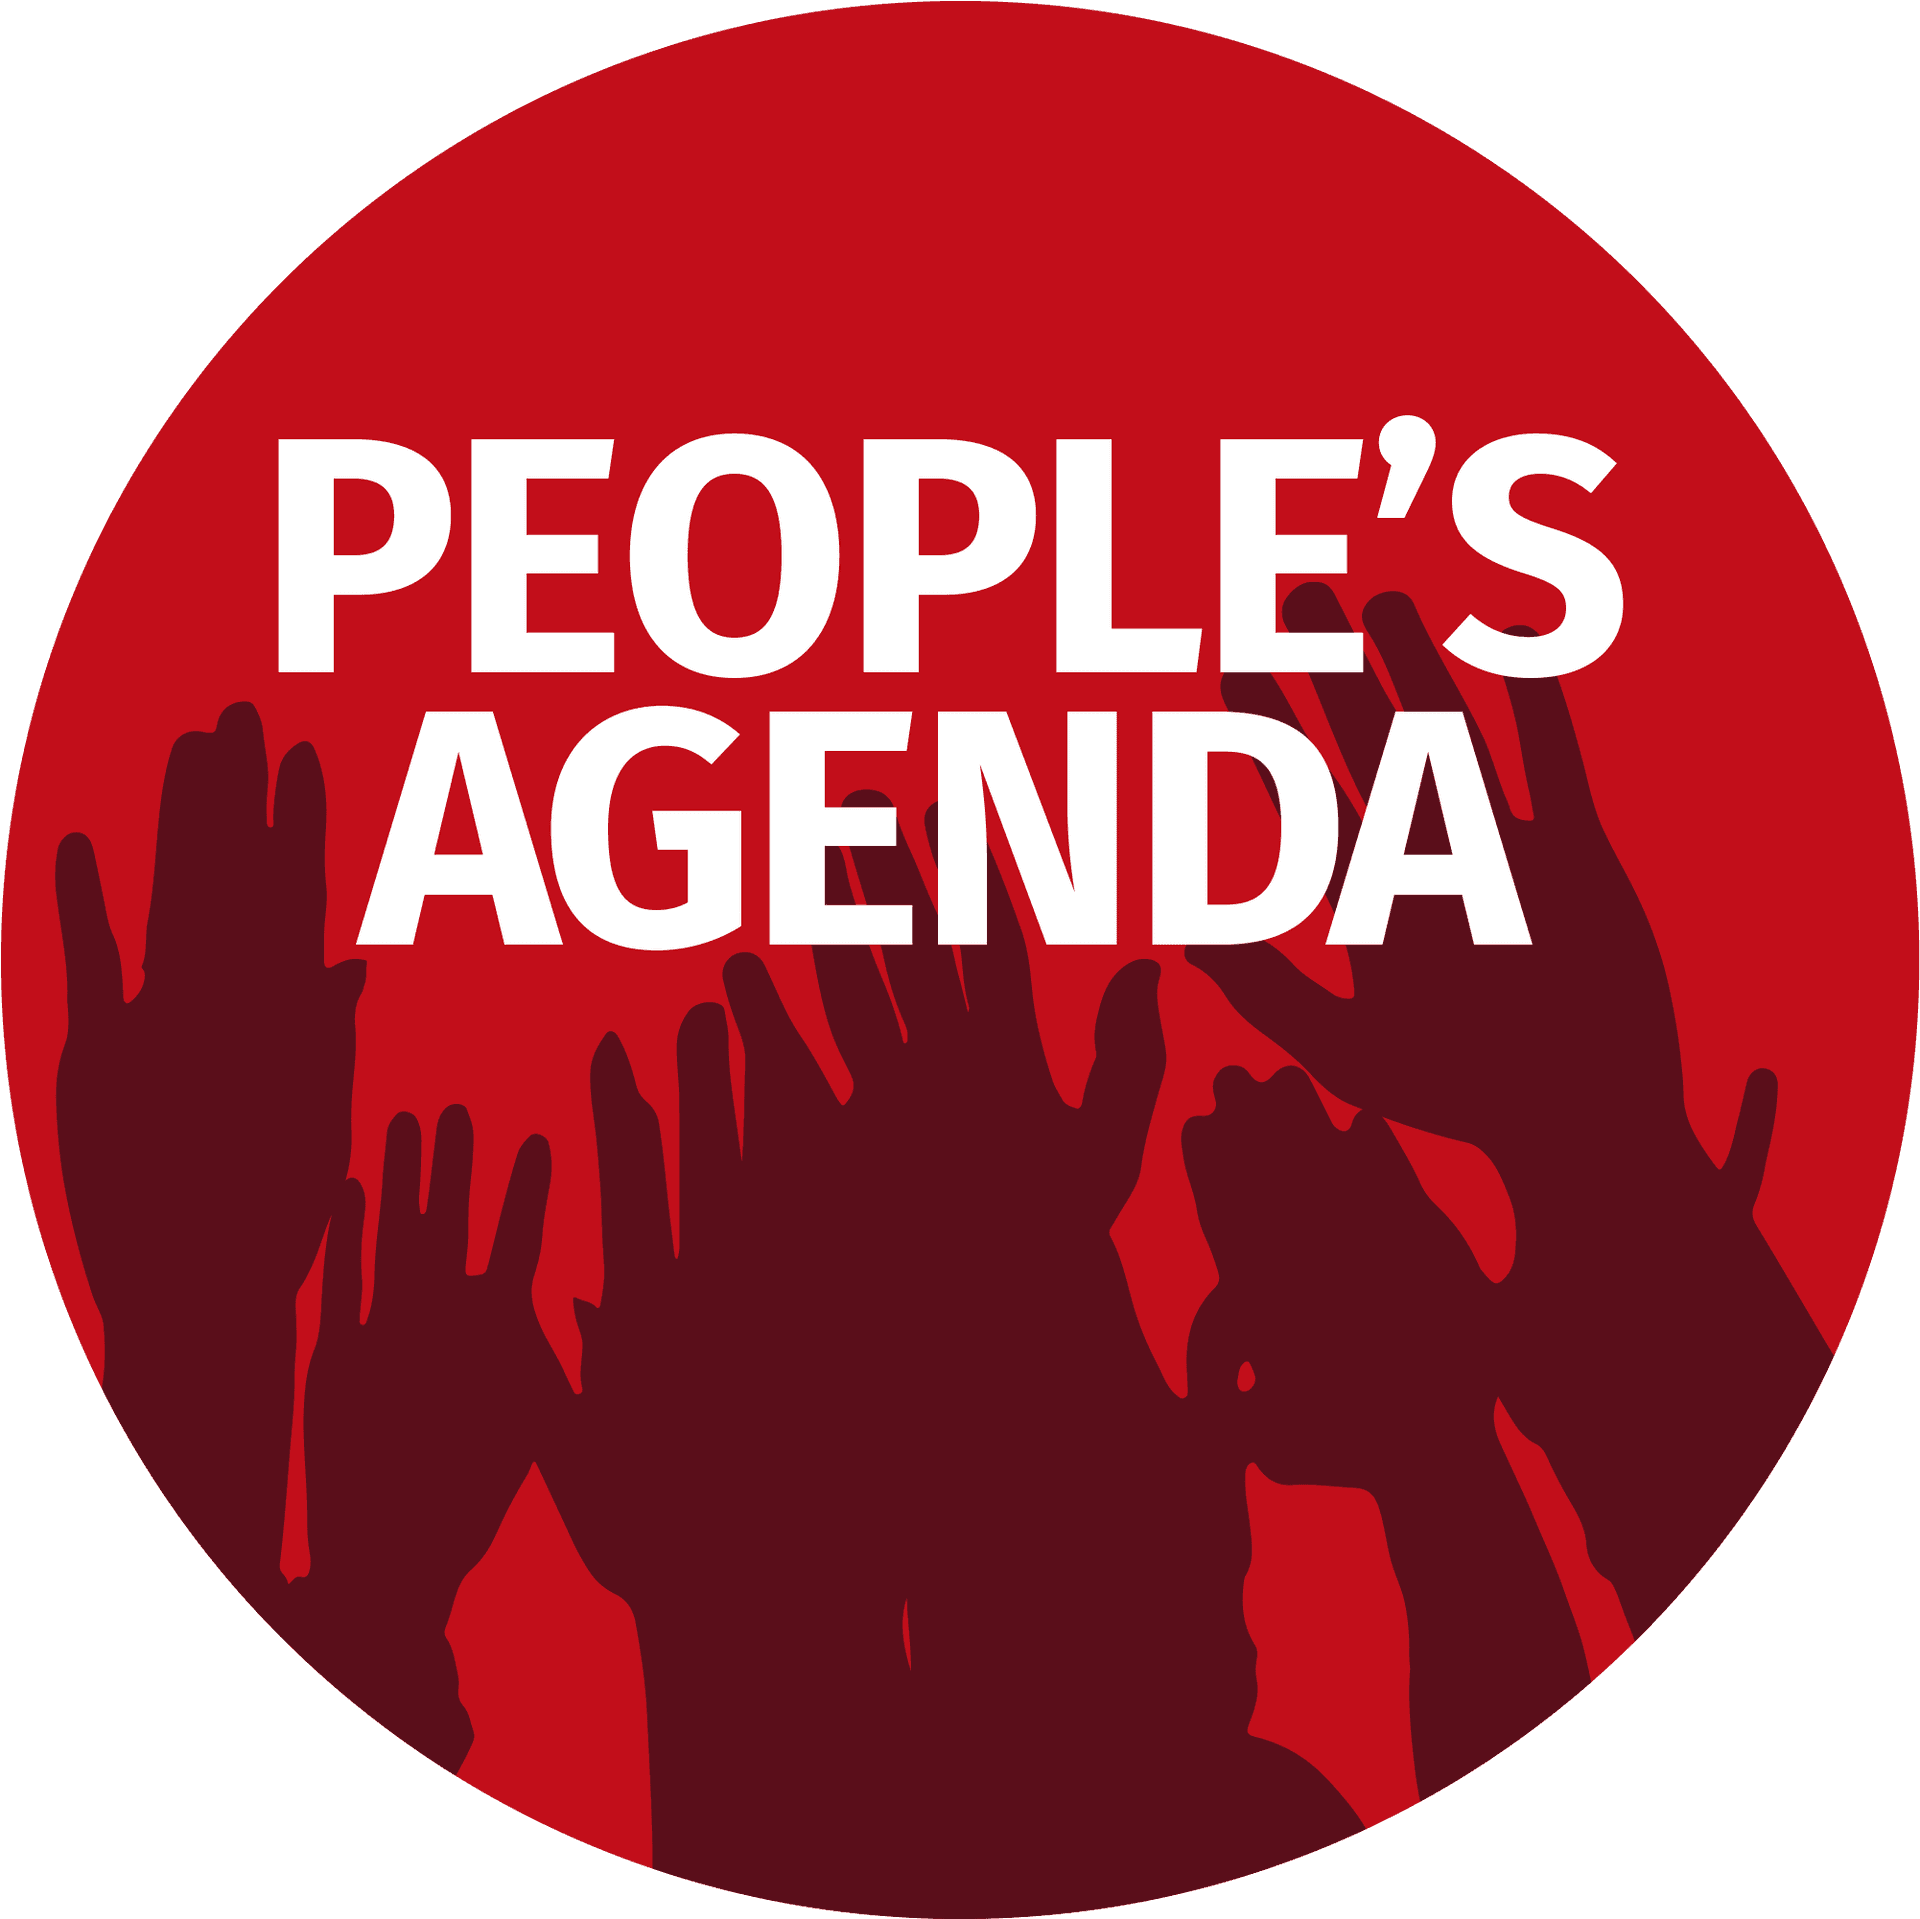 Peoples Agenda Rally Sign PNG image